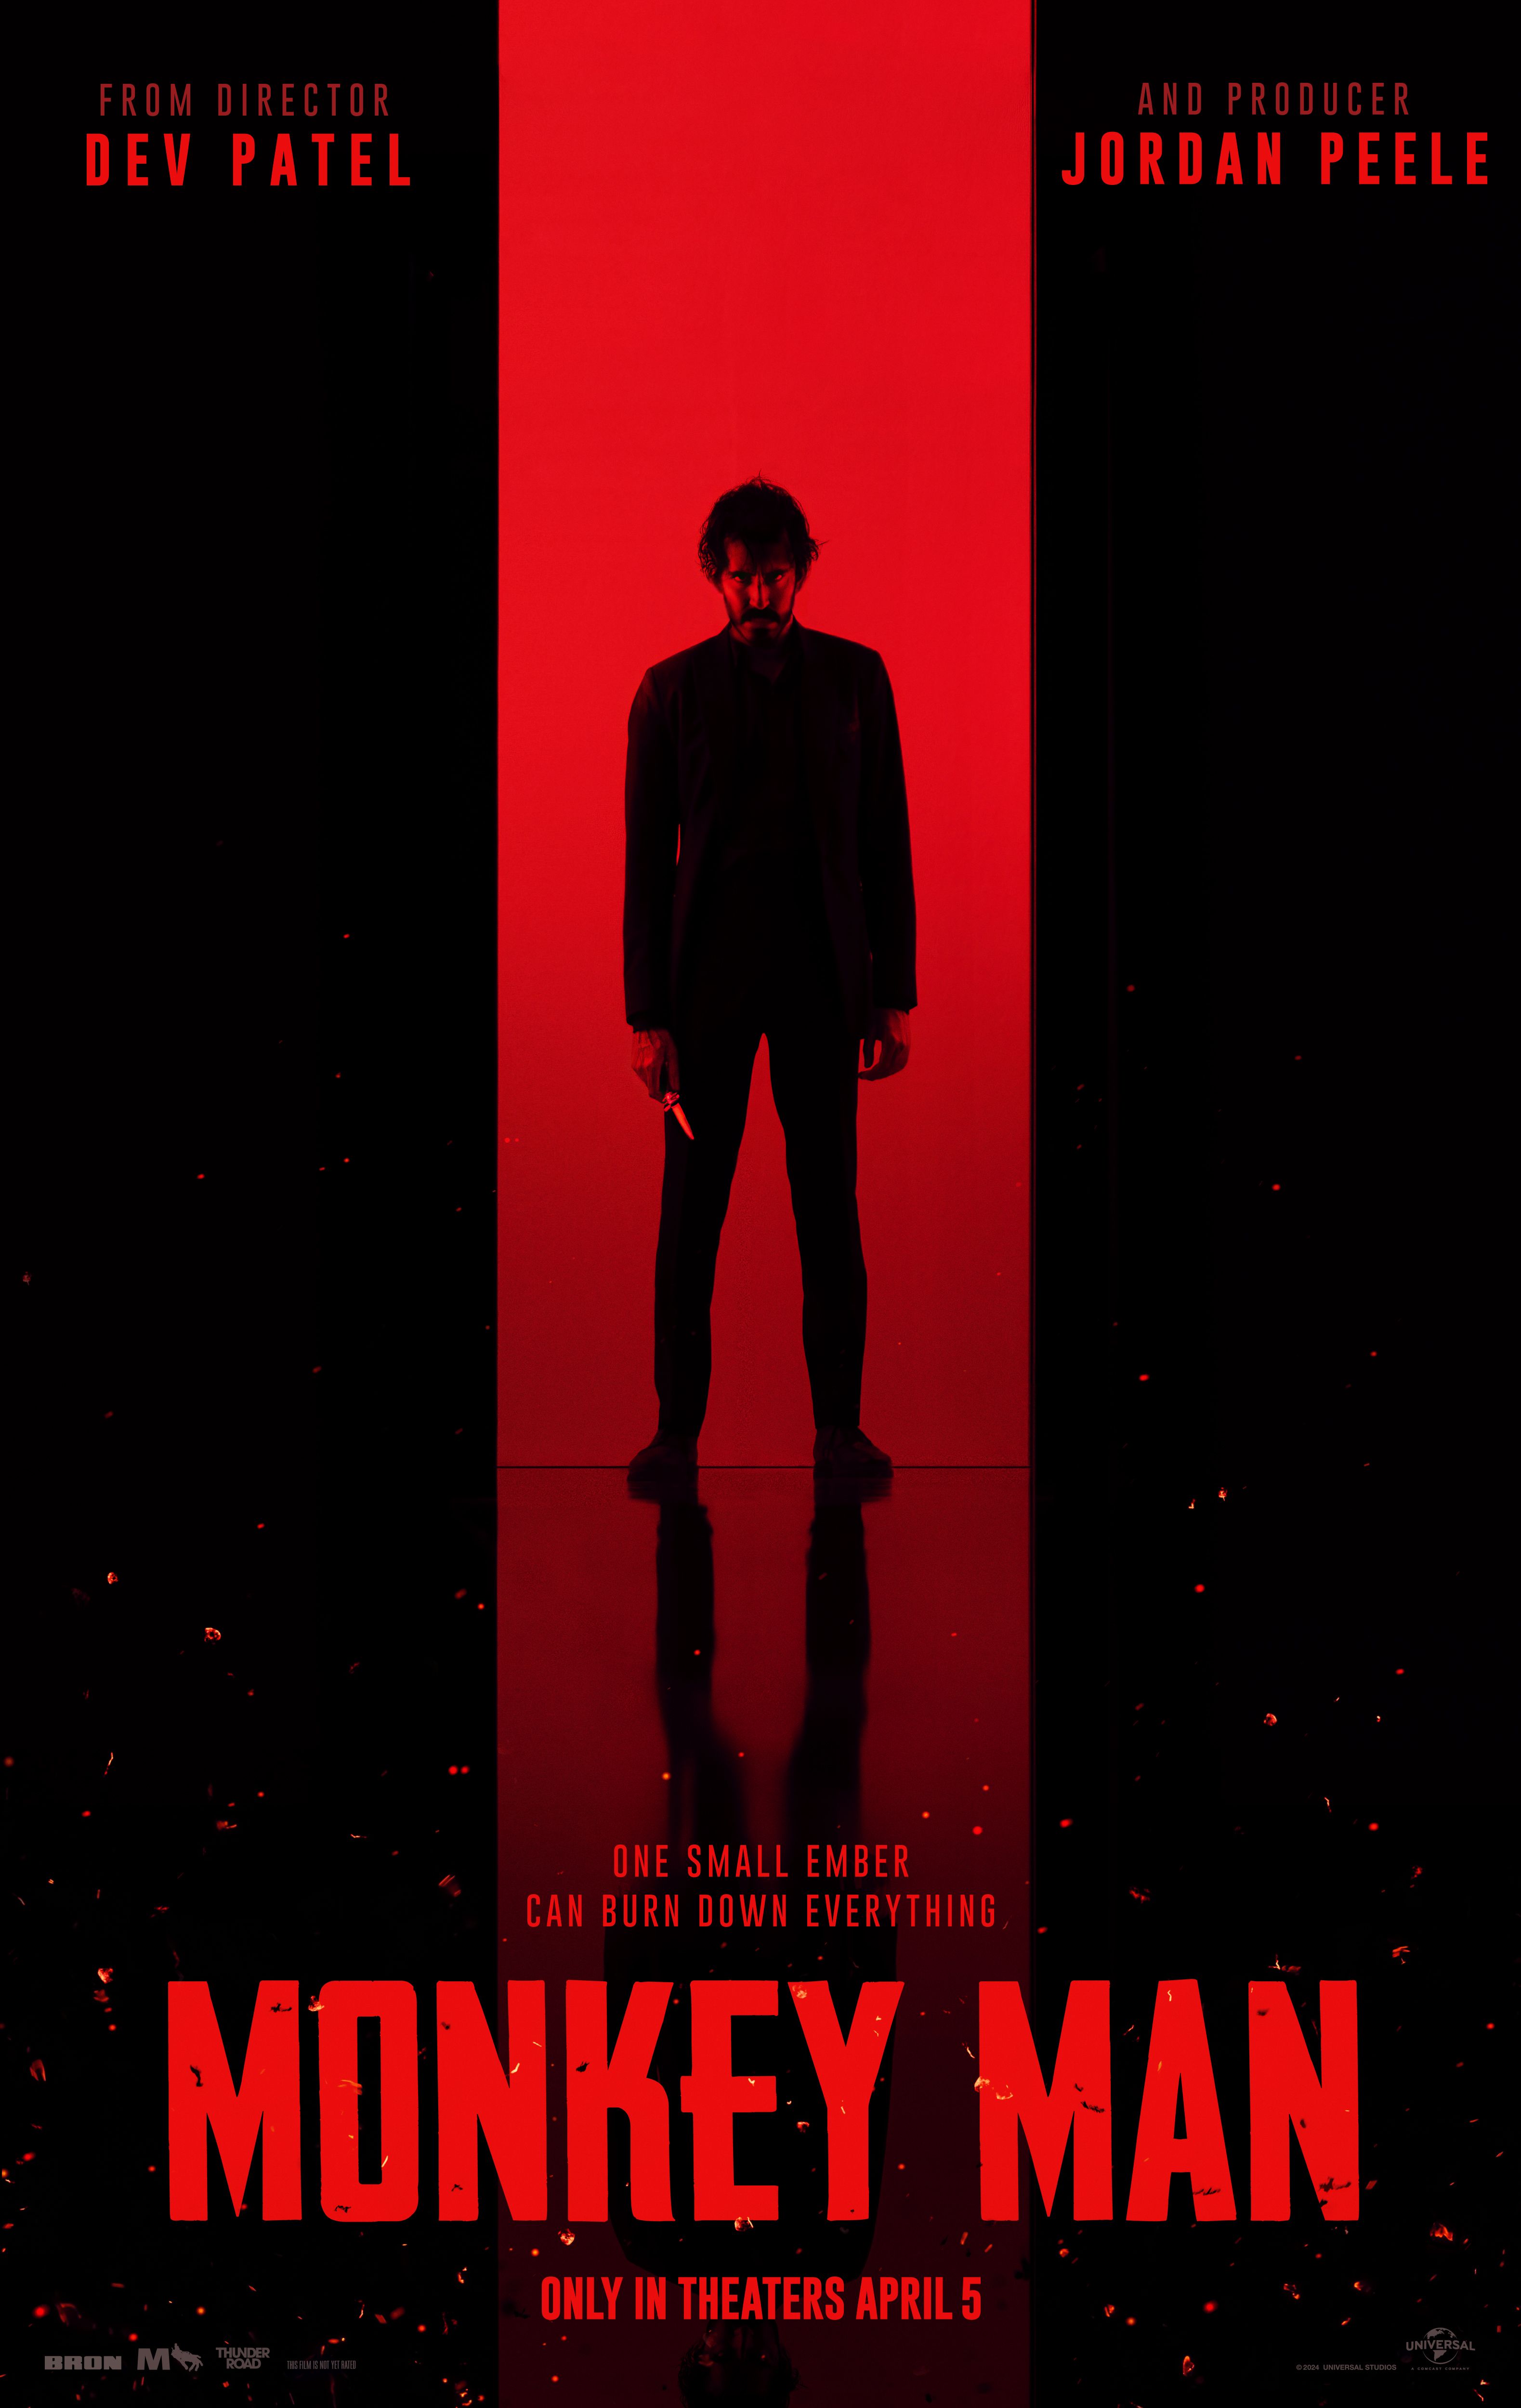 Monkey Man poster showing Dev Patel holding a knife in front of a black and red background